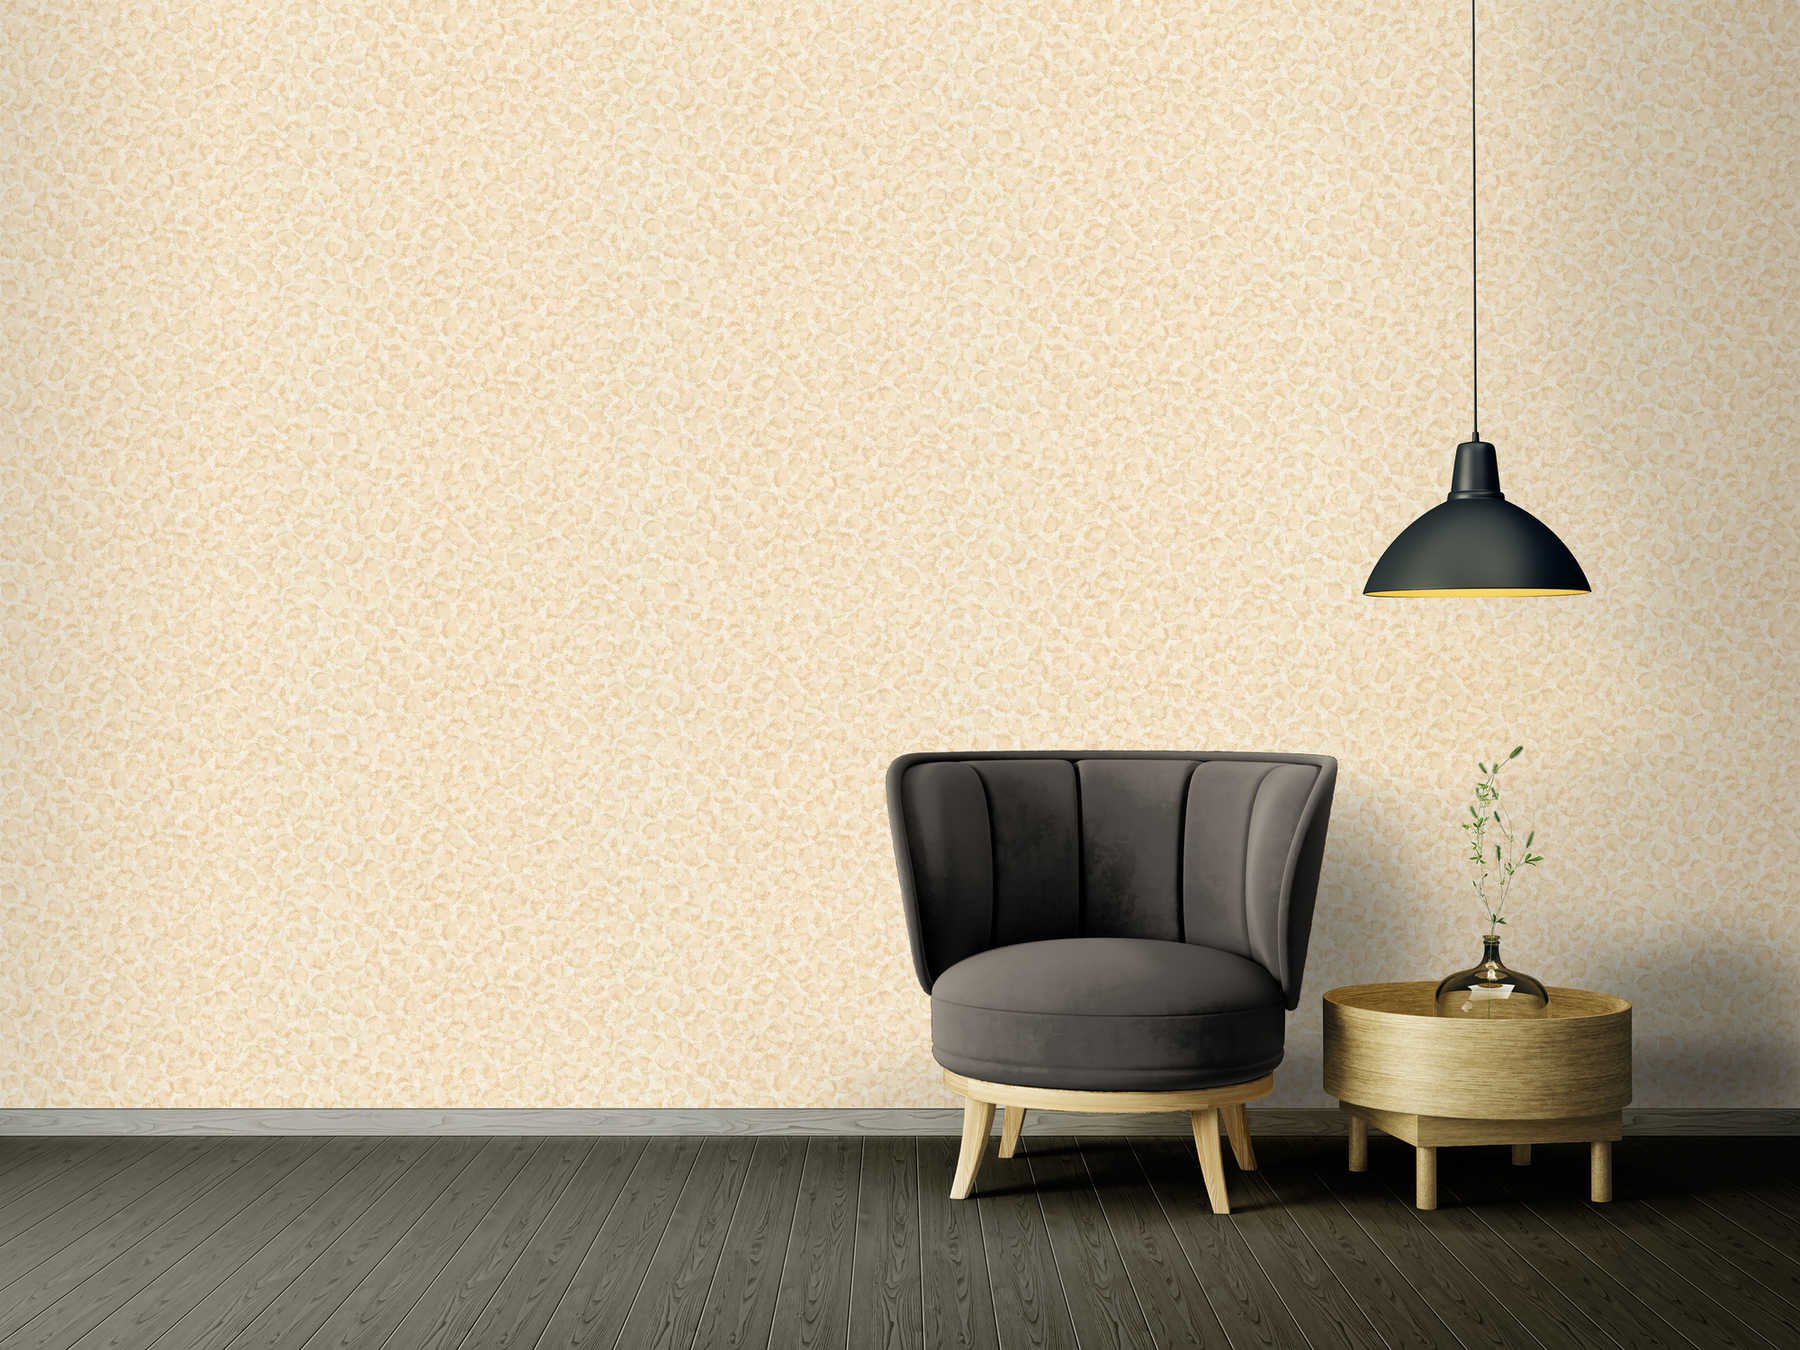             Polka dots wallpaper with spots design in ethnic style - beige
        